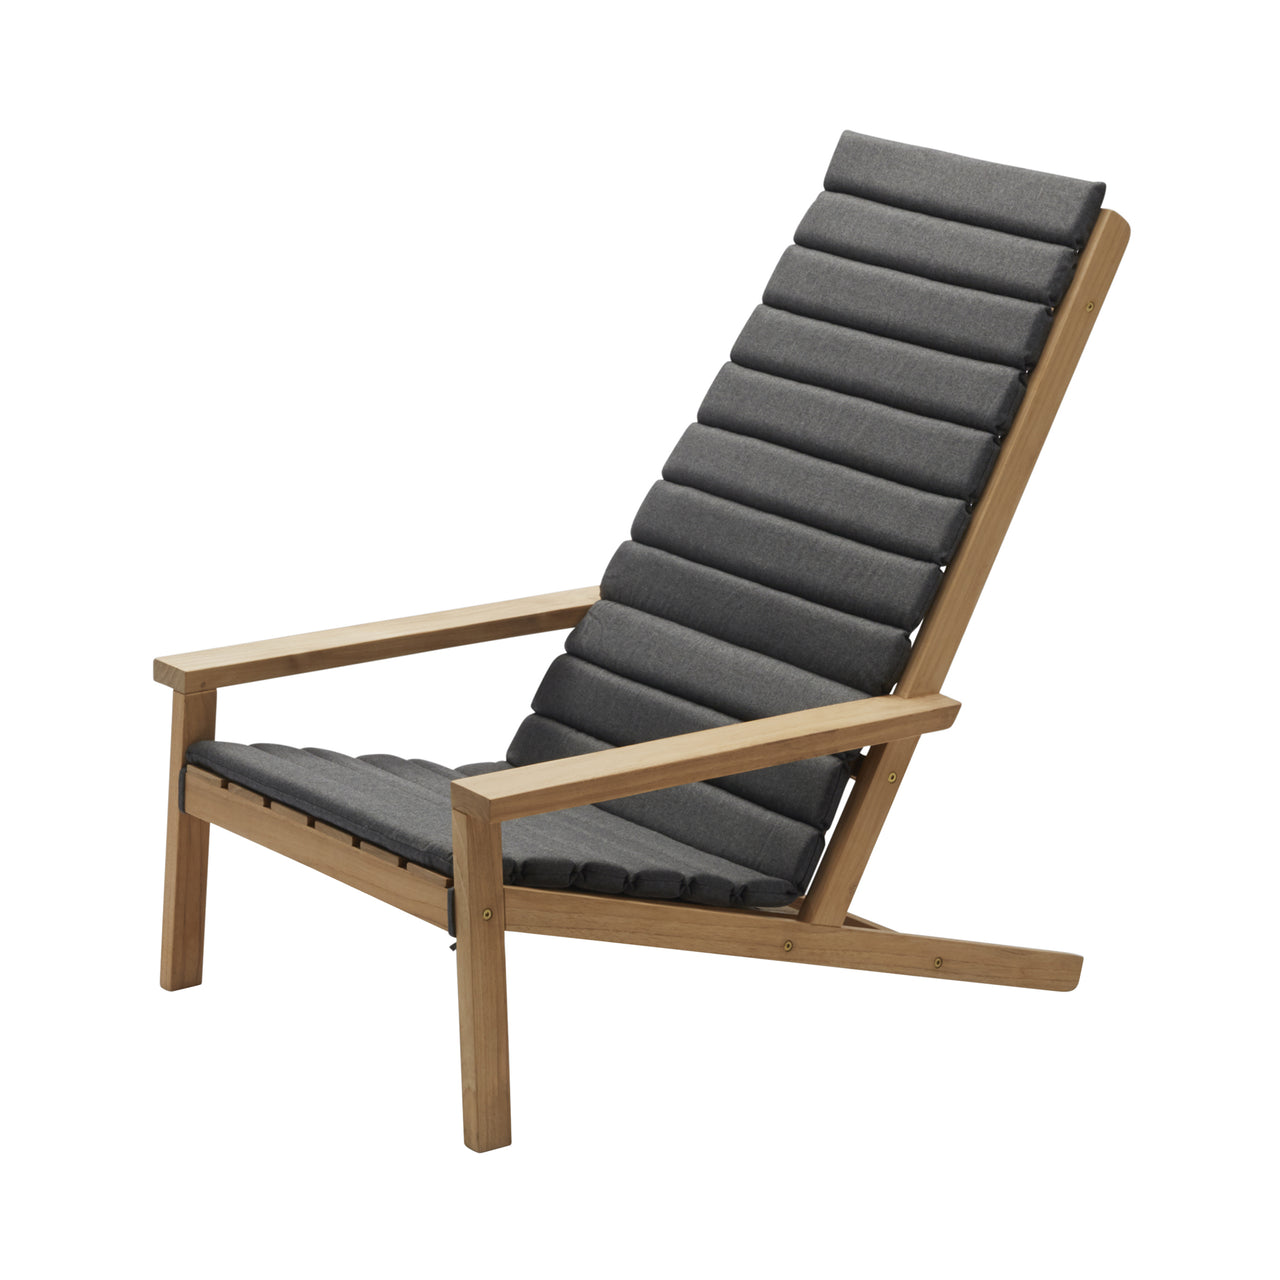 Between Lines Deck Chair: With Charcoal Cushion